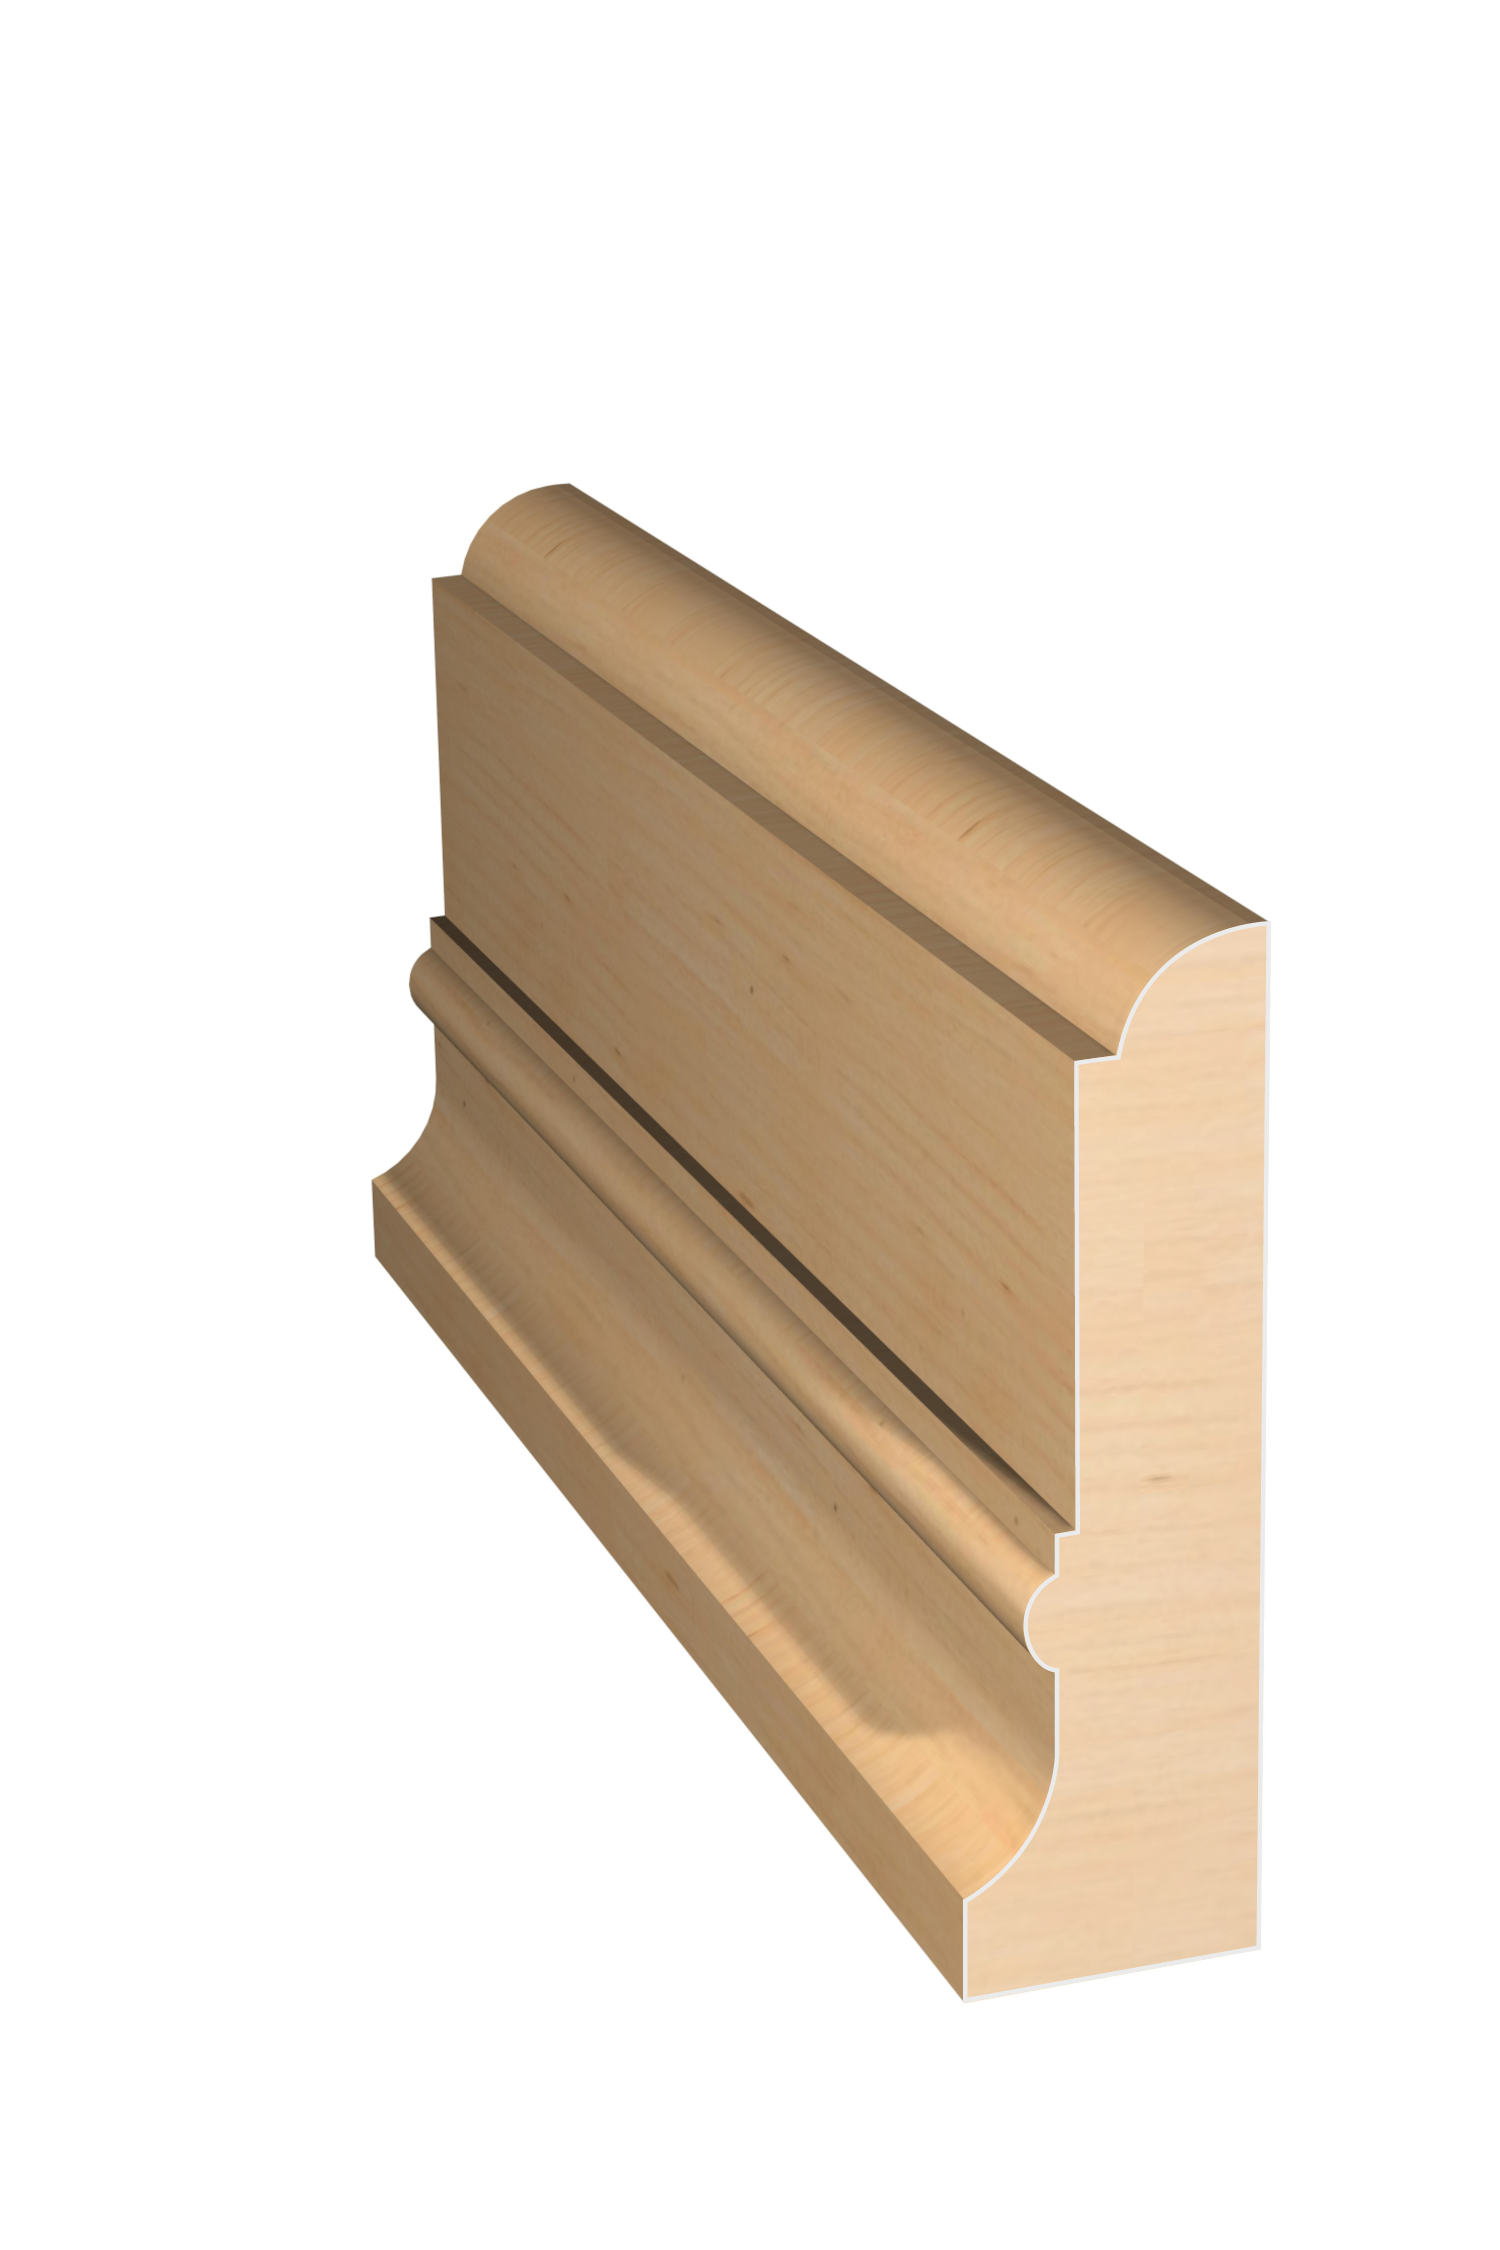 Three dimensional rendering of custom casing wood molding CAPL2344 made by Public Lumber Company in Detroit.